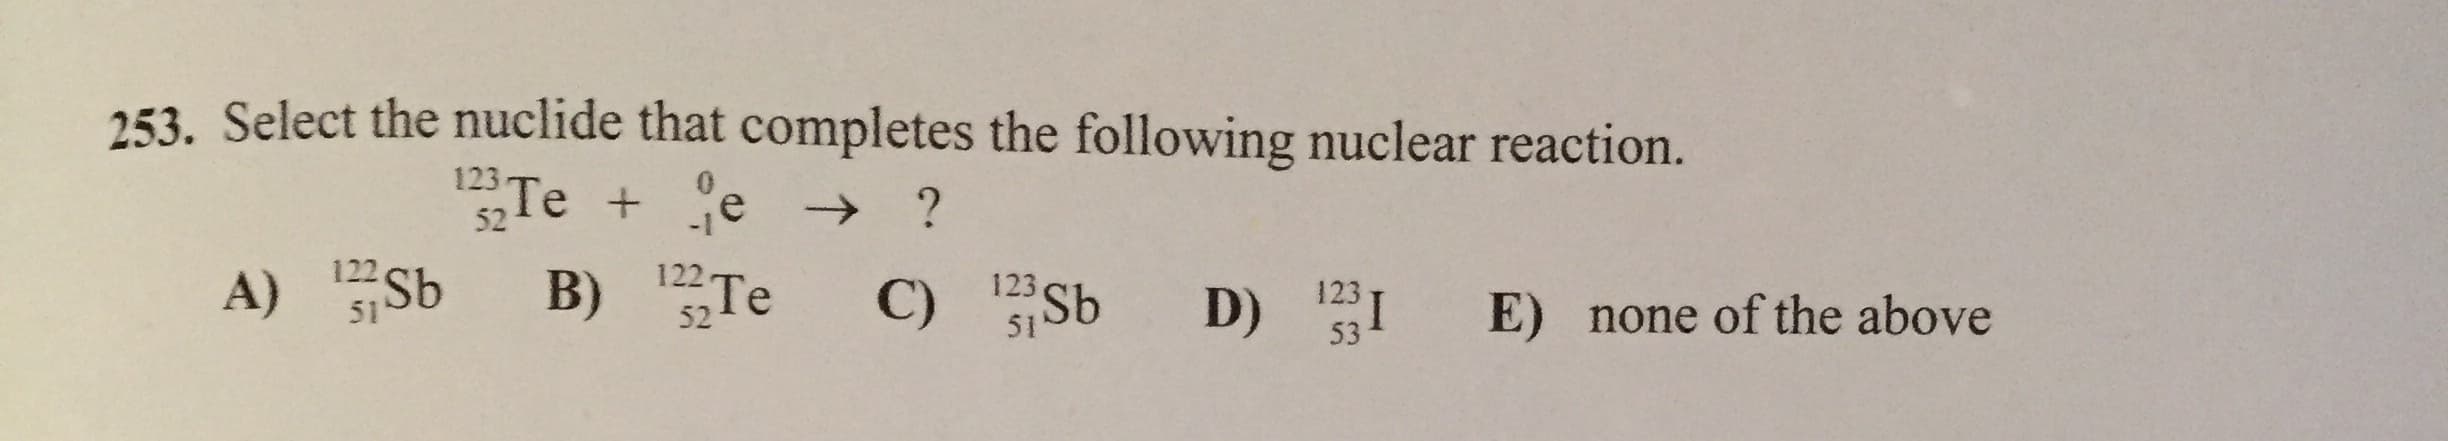 253. Select the nuclide that completes the following nuclear reaction.
Te + e →
122 Te
0.
123
-1
52
123
123 Sb
none of the above
D) I
E)
122
A) Sb
53
51
52
51
